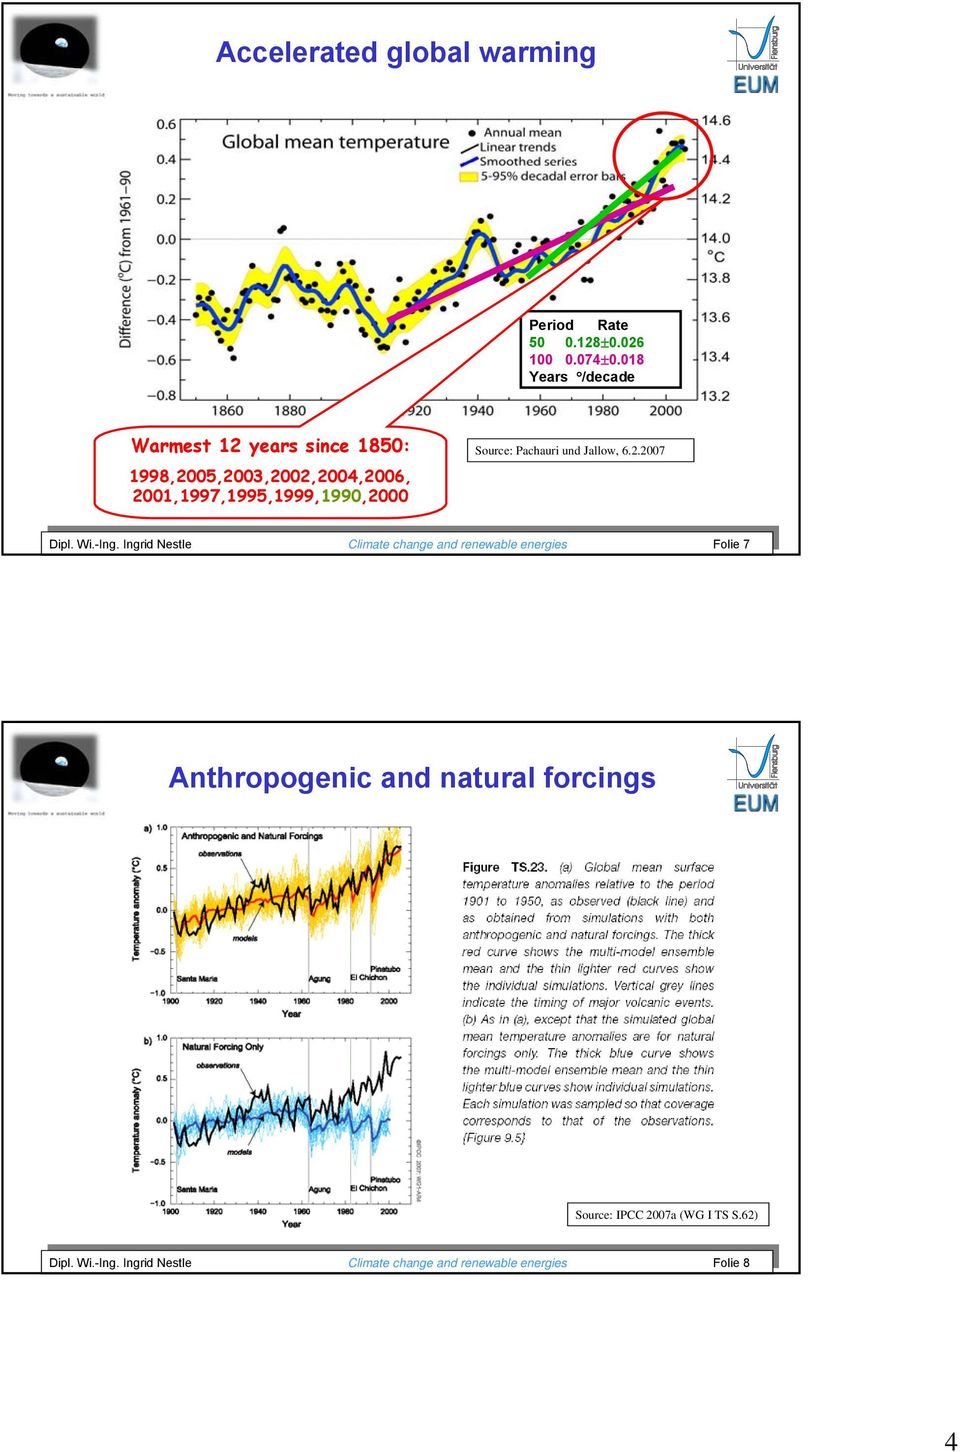 Wi.-Ing. Ingrid Nestle Climate change and renewable energies Folie 7 Dipl. Wi.-Ing. Ingrid Nestle Climate change and renewable energies Folie 7 Anthropogenic and natural forcings Source: IPCC 2007a (WG I TS S.